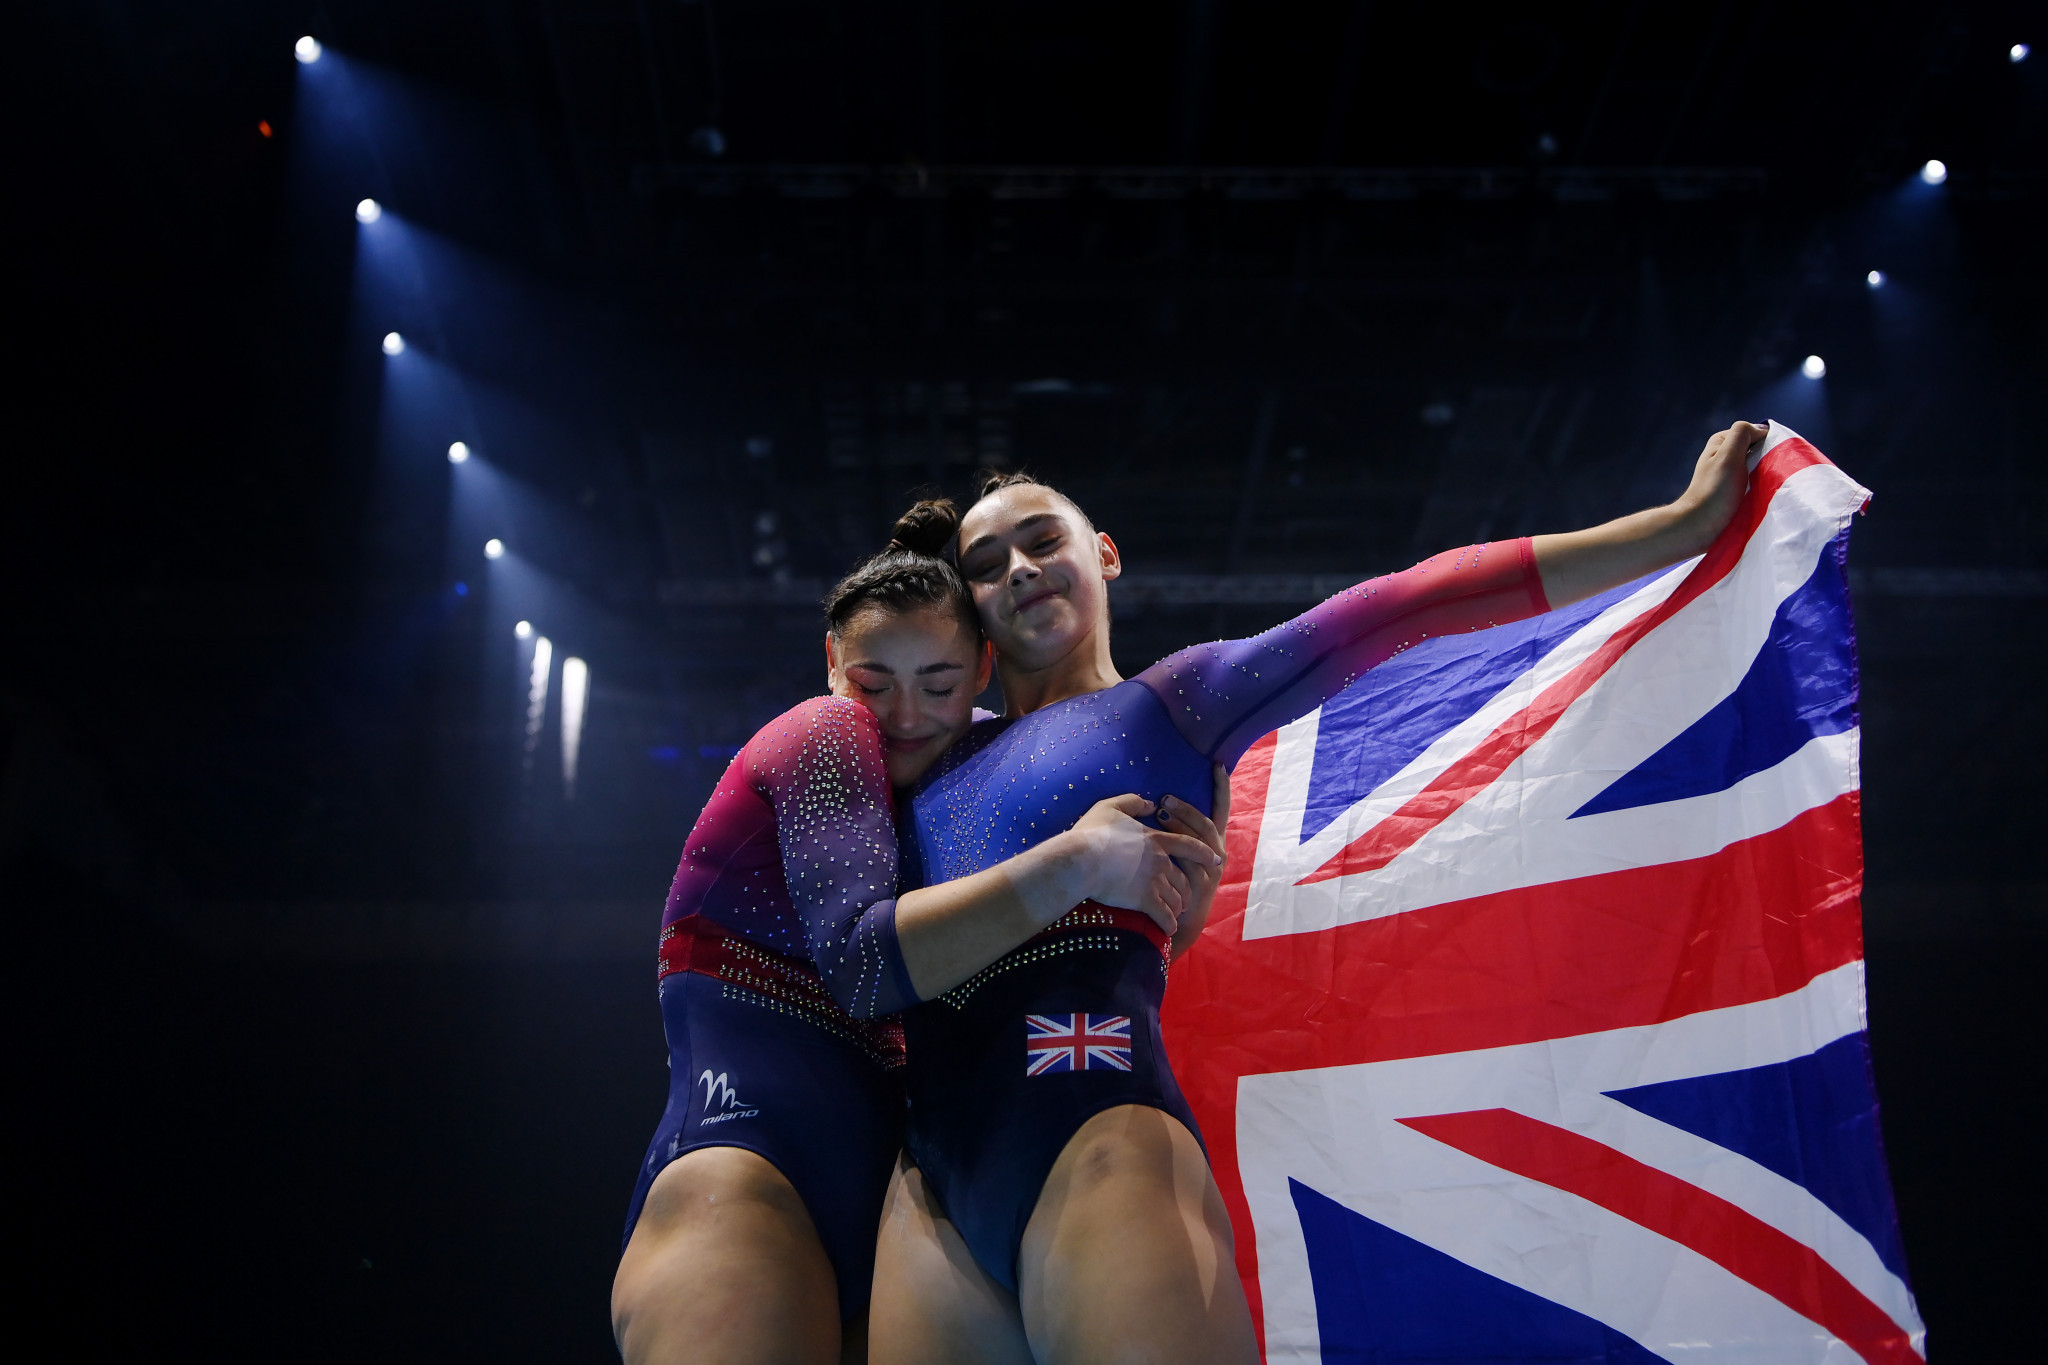 Jessica Gadirova is hopeful that her twin Jennifer will be able to compete at the Olympics in Paris ©Getty Images